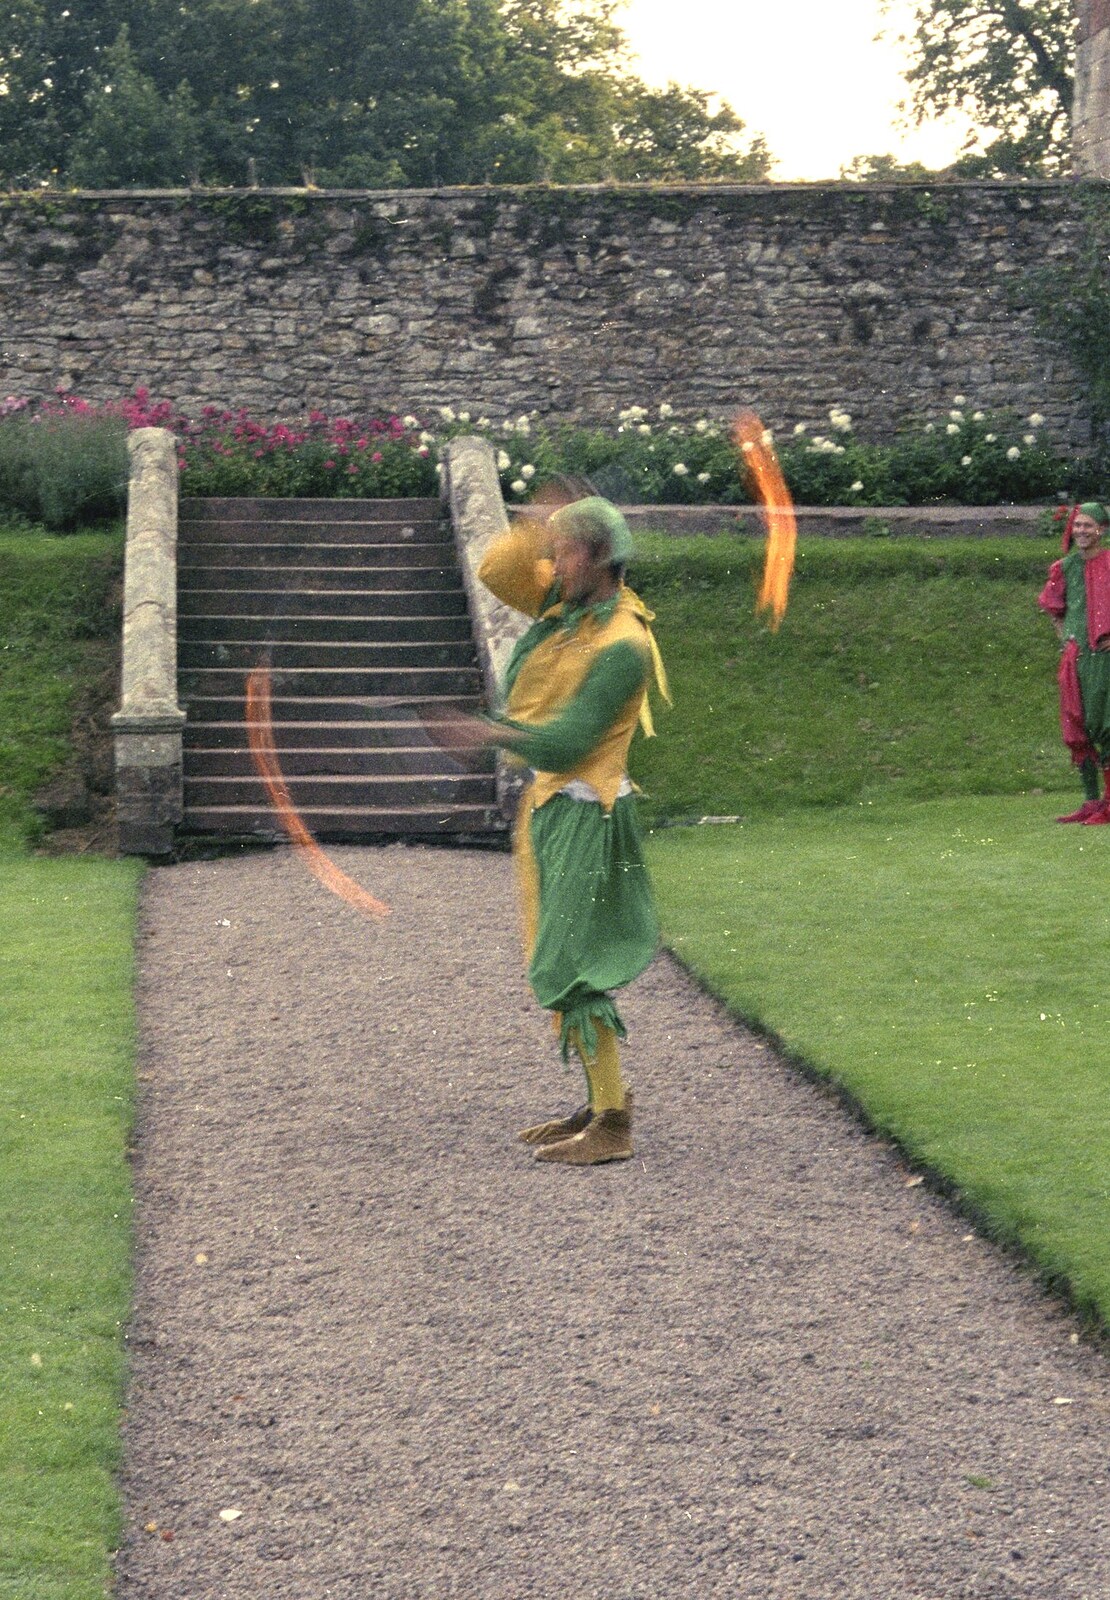 Stuart and Sarah's CISU Wedding, Naworth Castle, Brampton, Cumbria - 21st September 1996: A jester does some juggling with flames